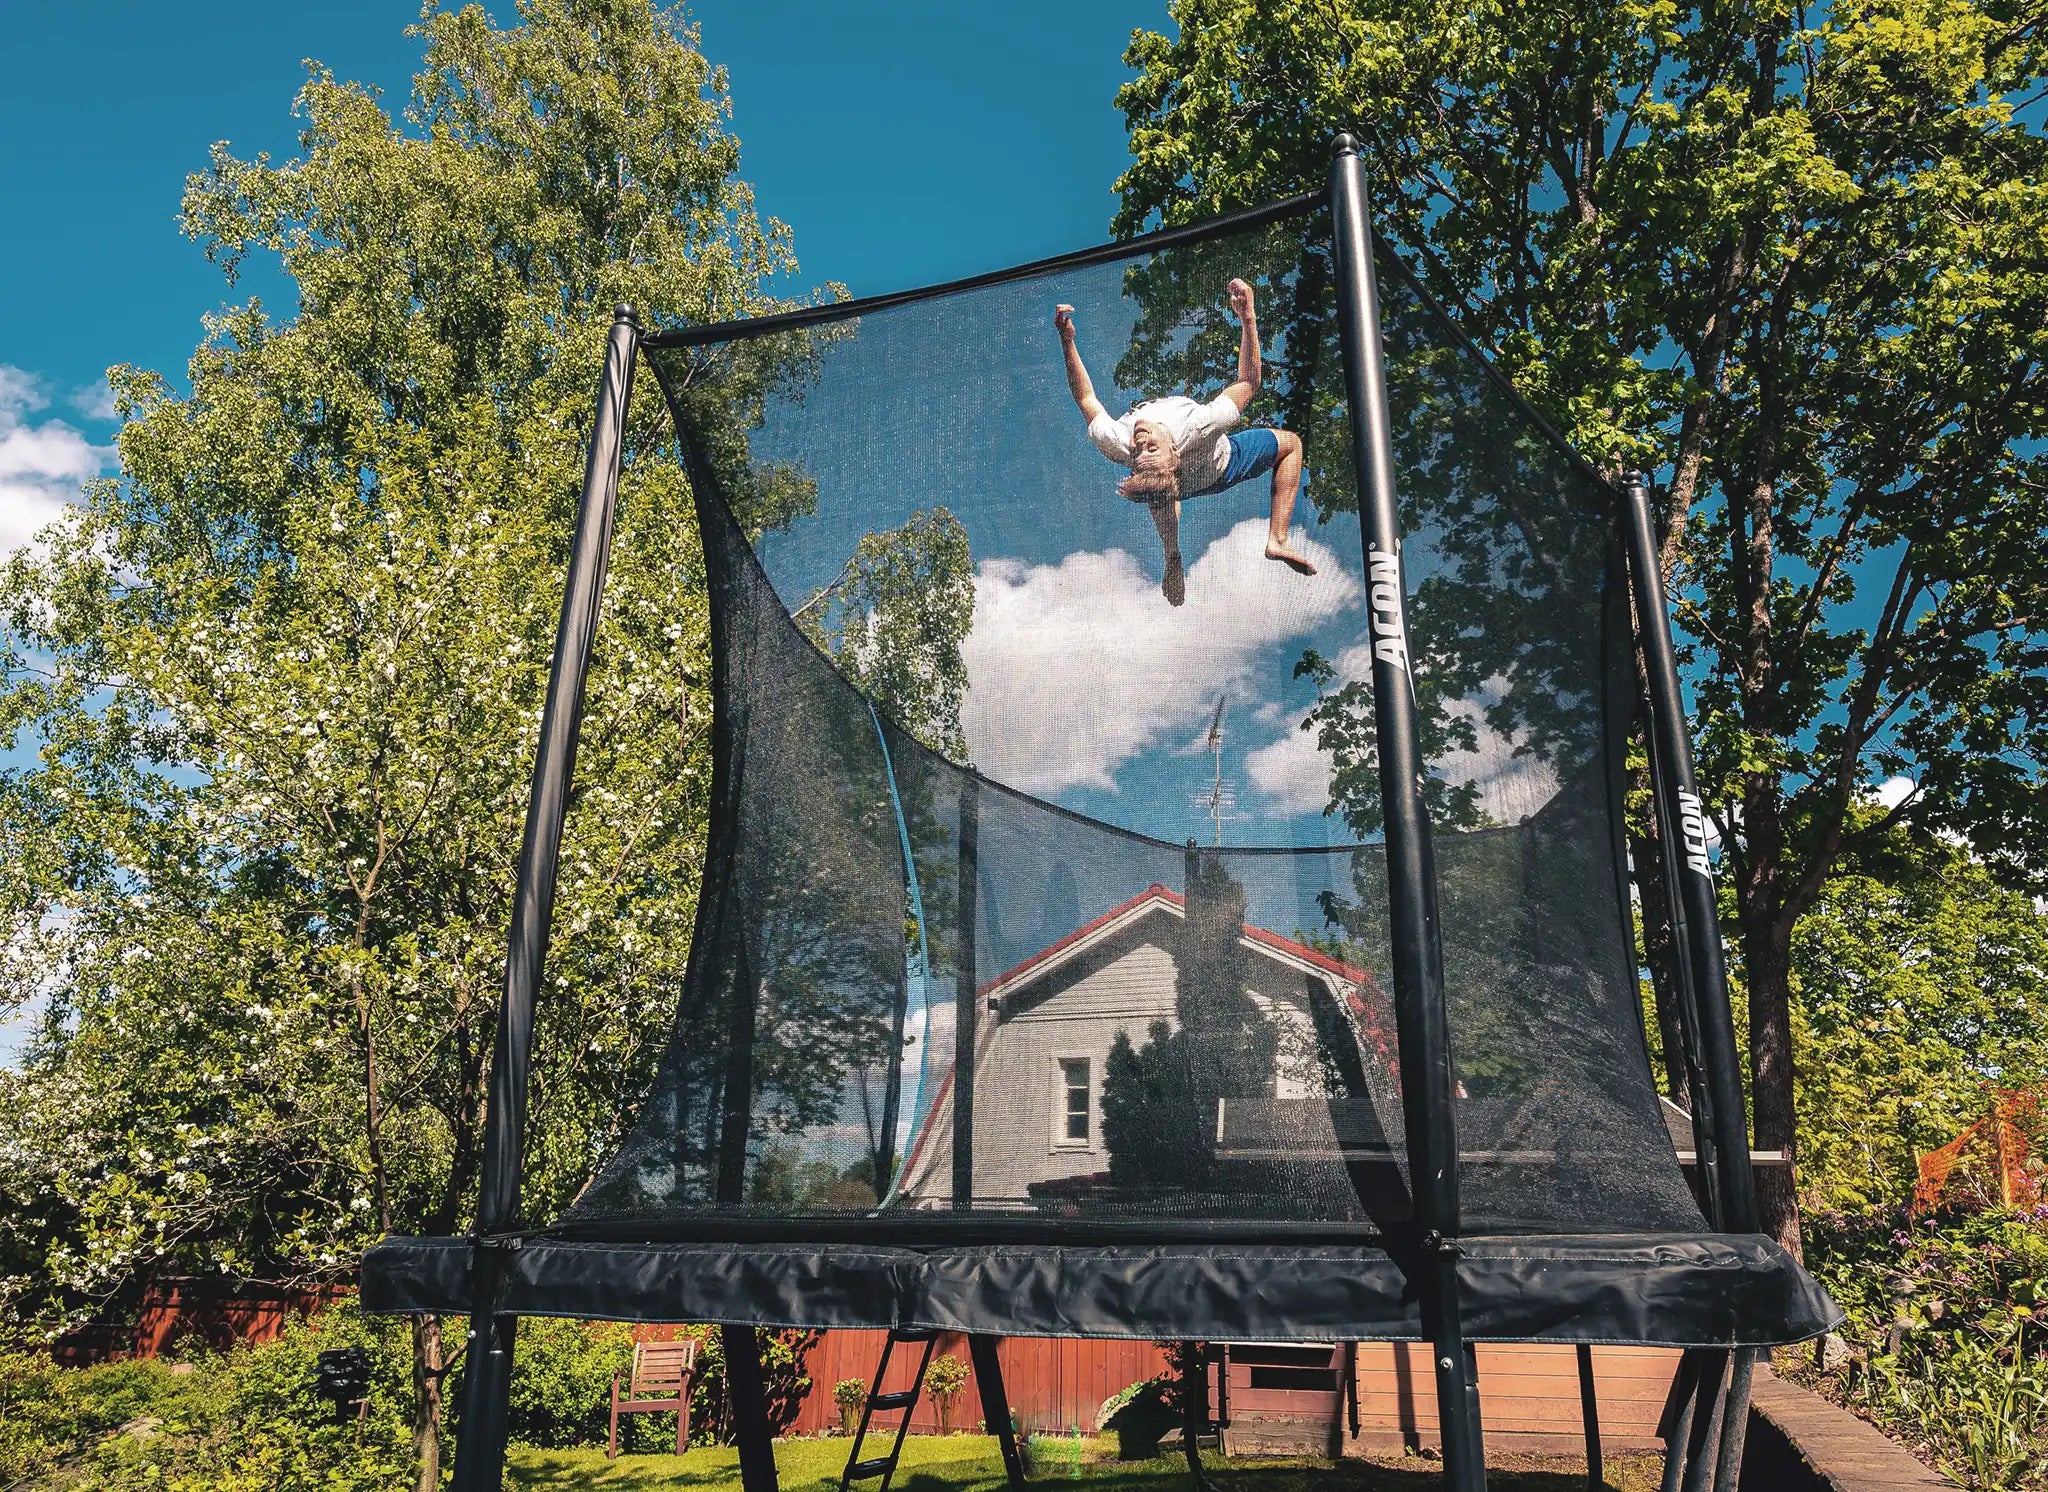 A young guy doing a flip on a rectangular trampoline with net.